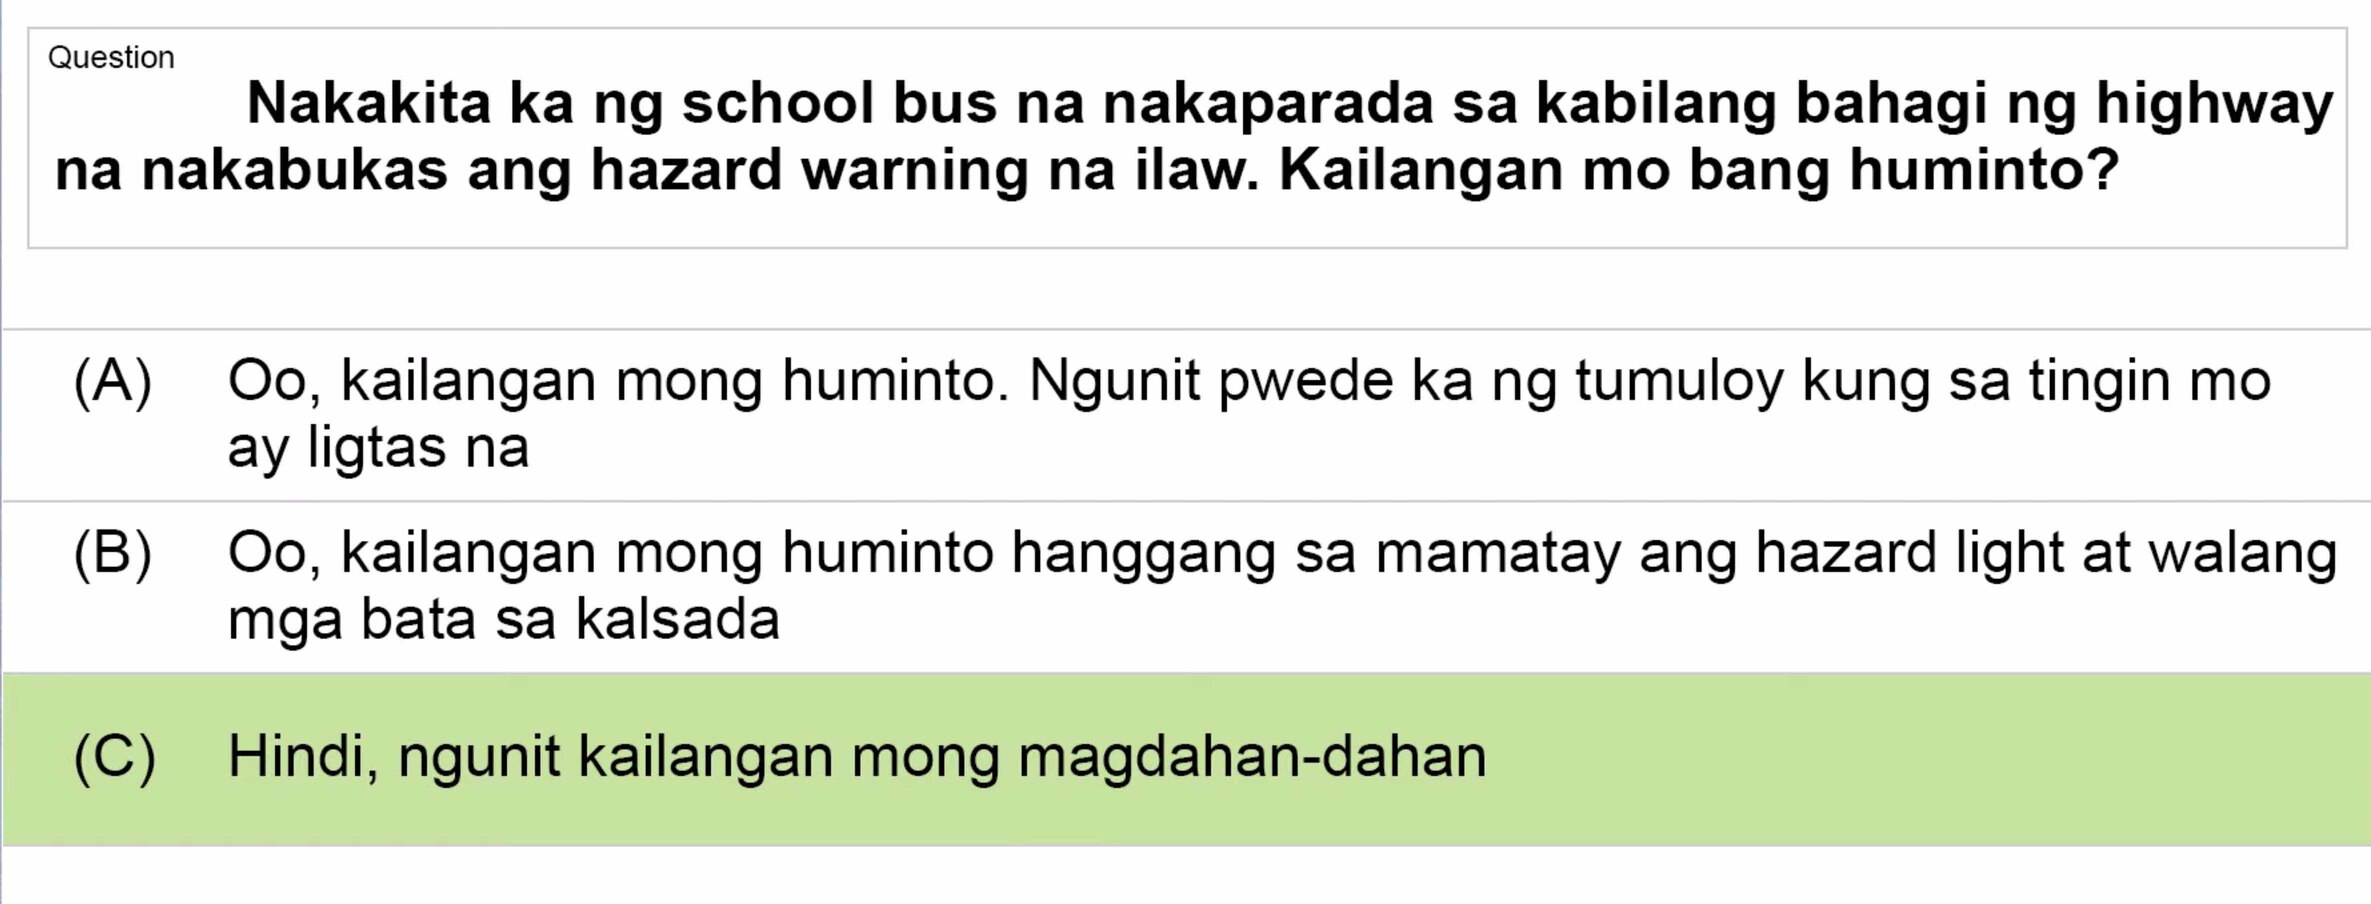 LTO Tagalog non professional exam reviewer light vehicle 3 (36)